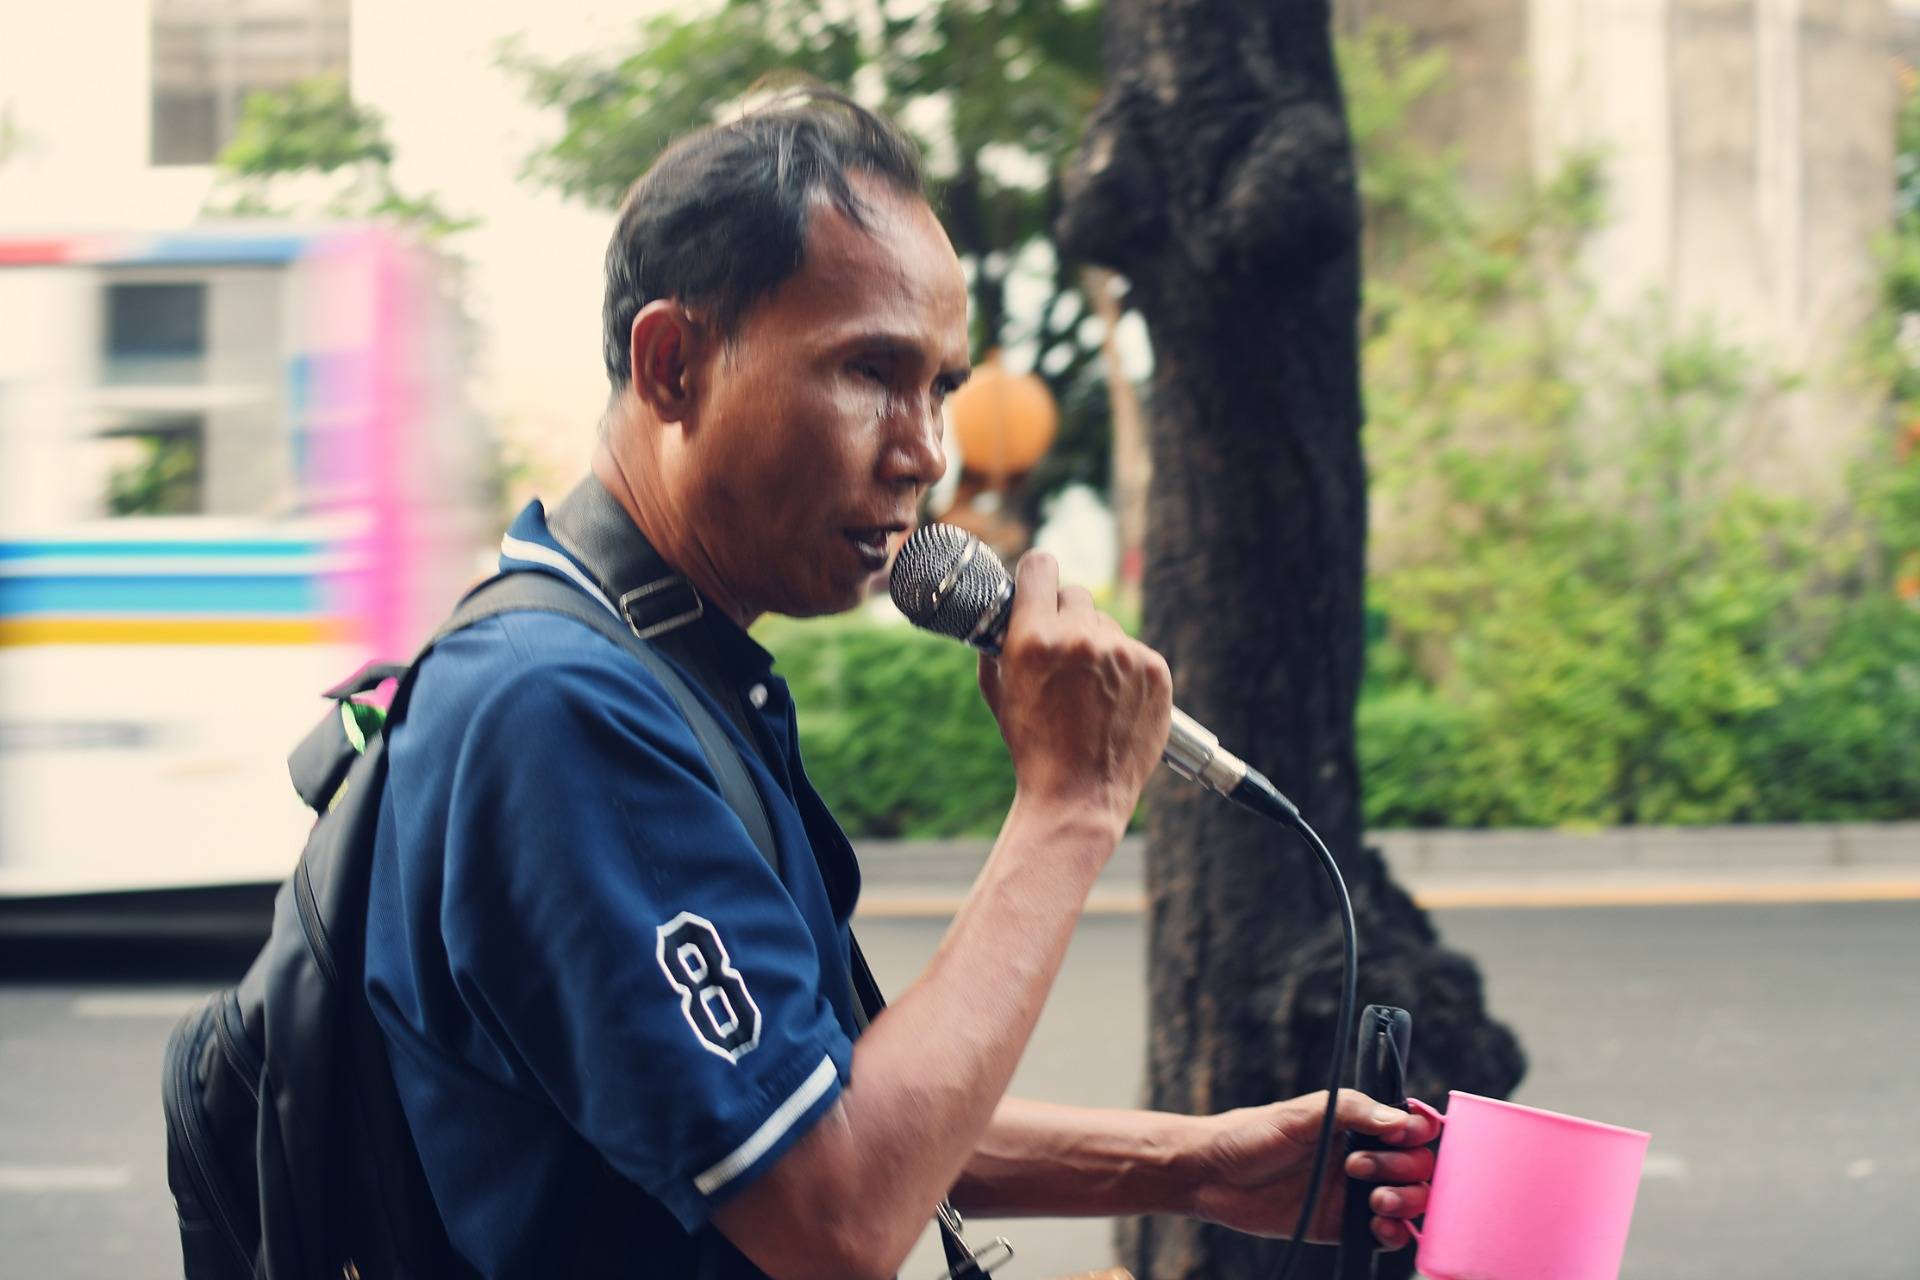 A blind man sings for donations